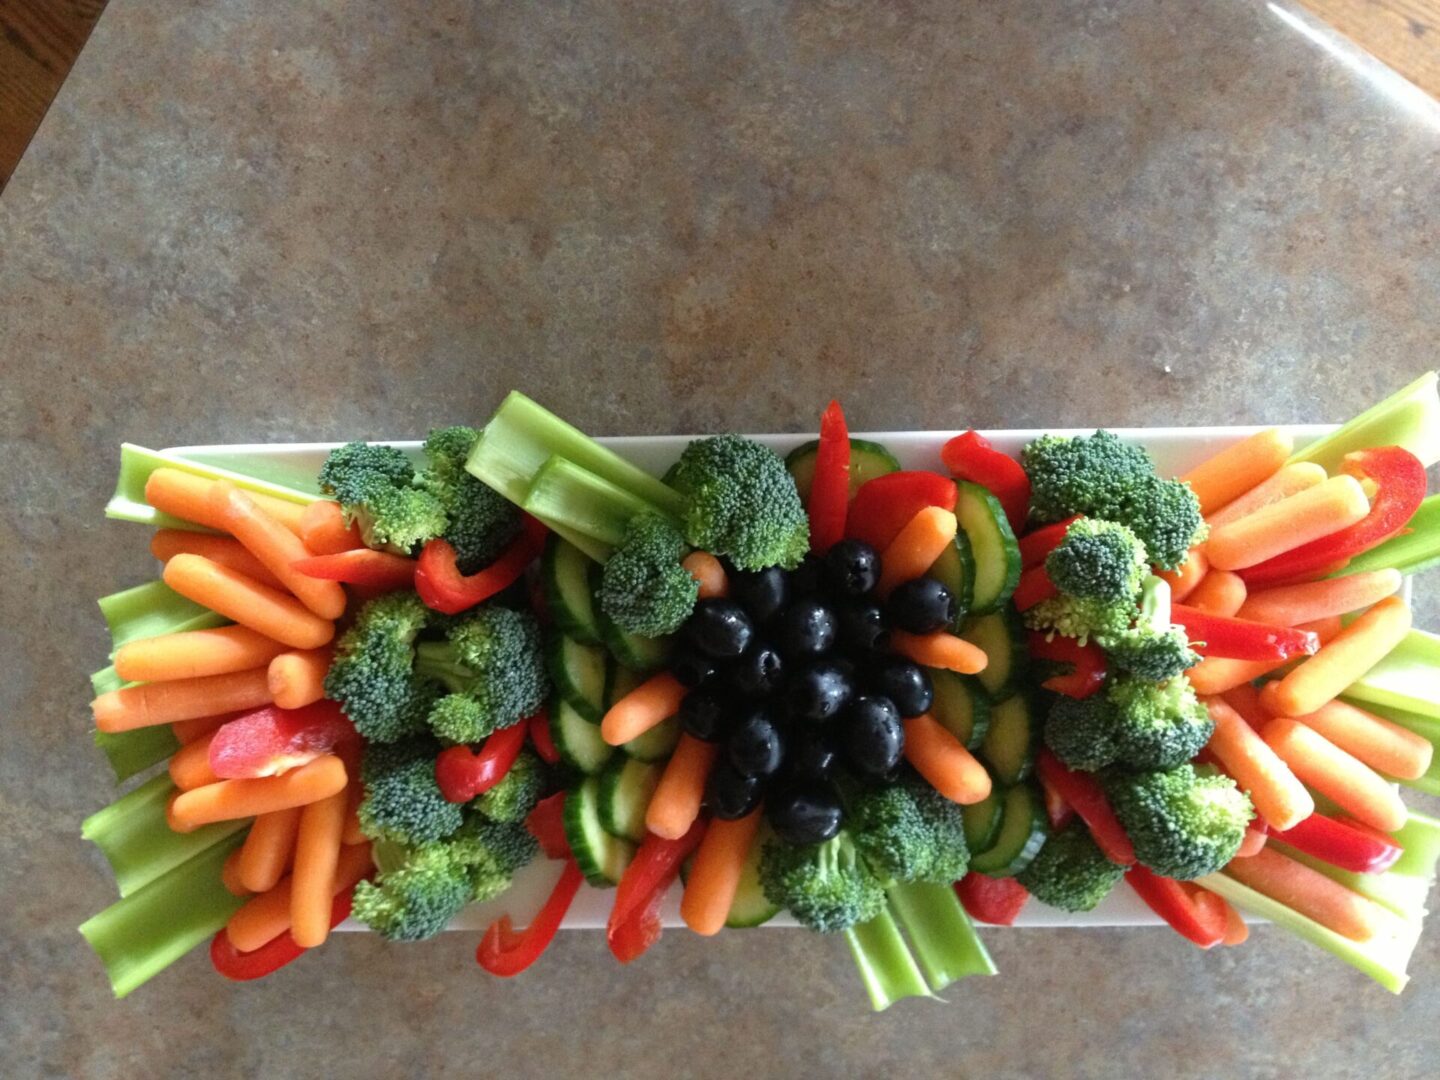 A tray of vegetables is shown on the table.